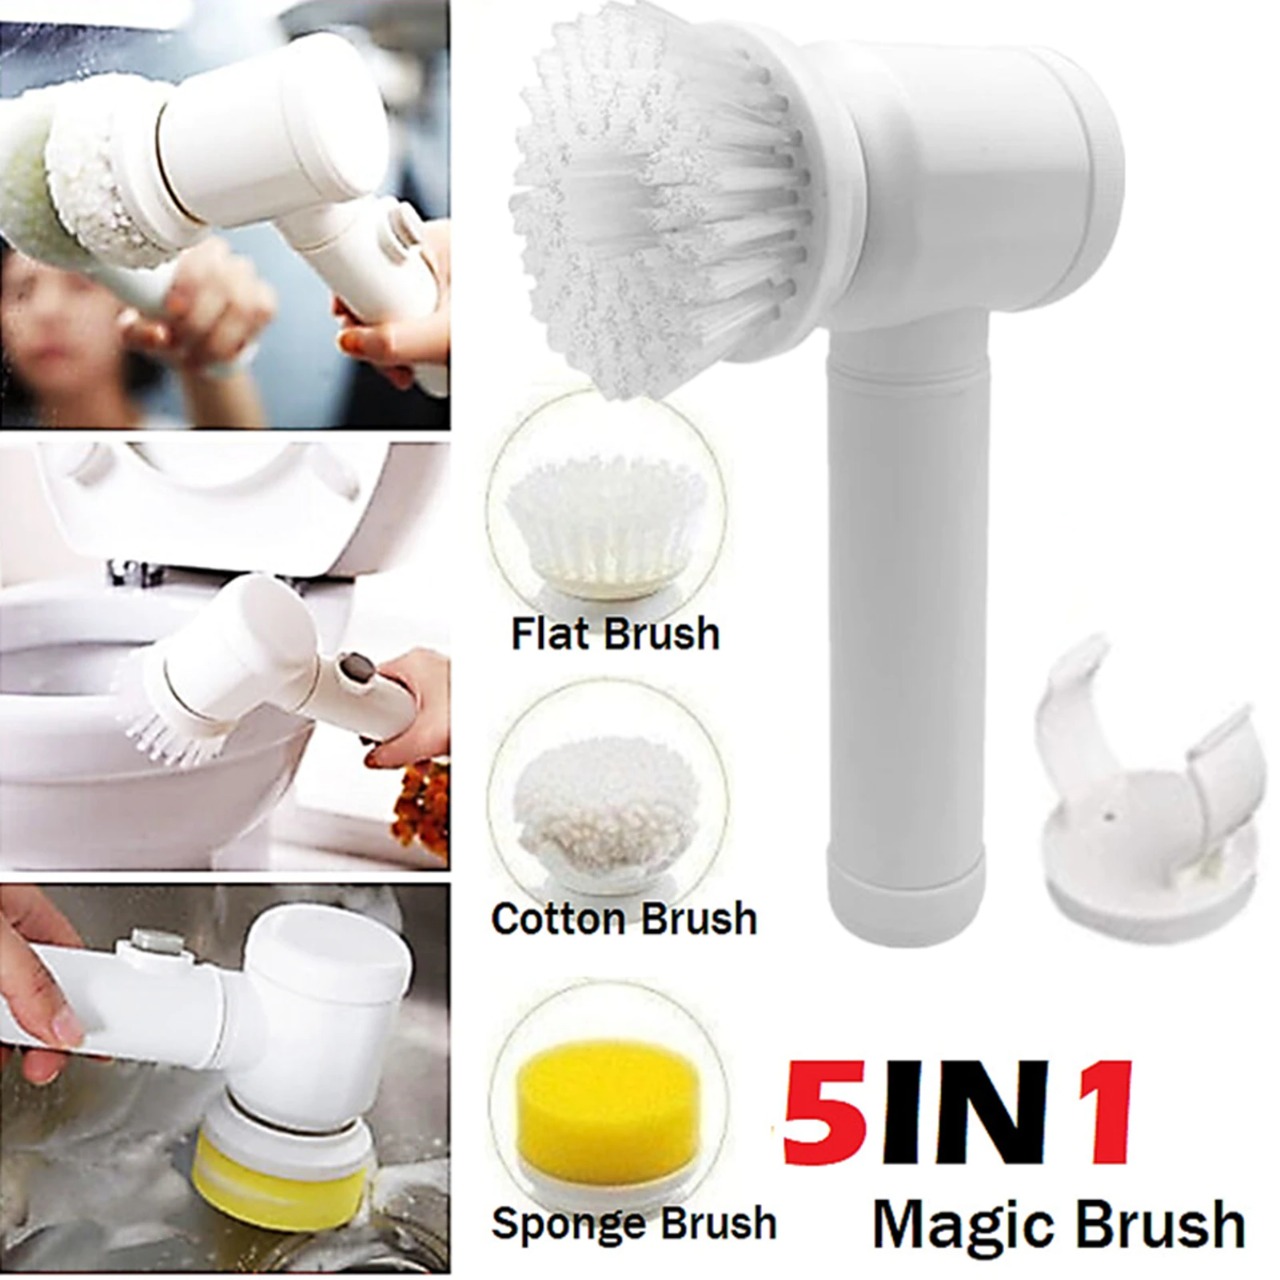 5 in 1 Handheld Bathtub Electric Brush Cleaner Scrubber For Kitchen and bath